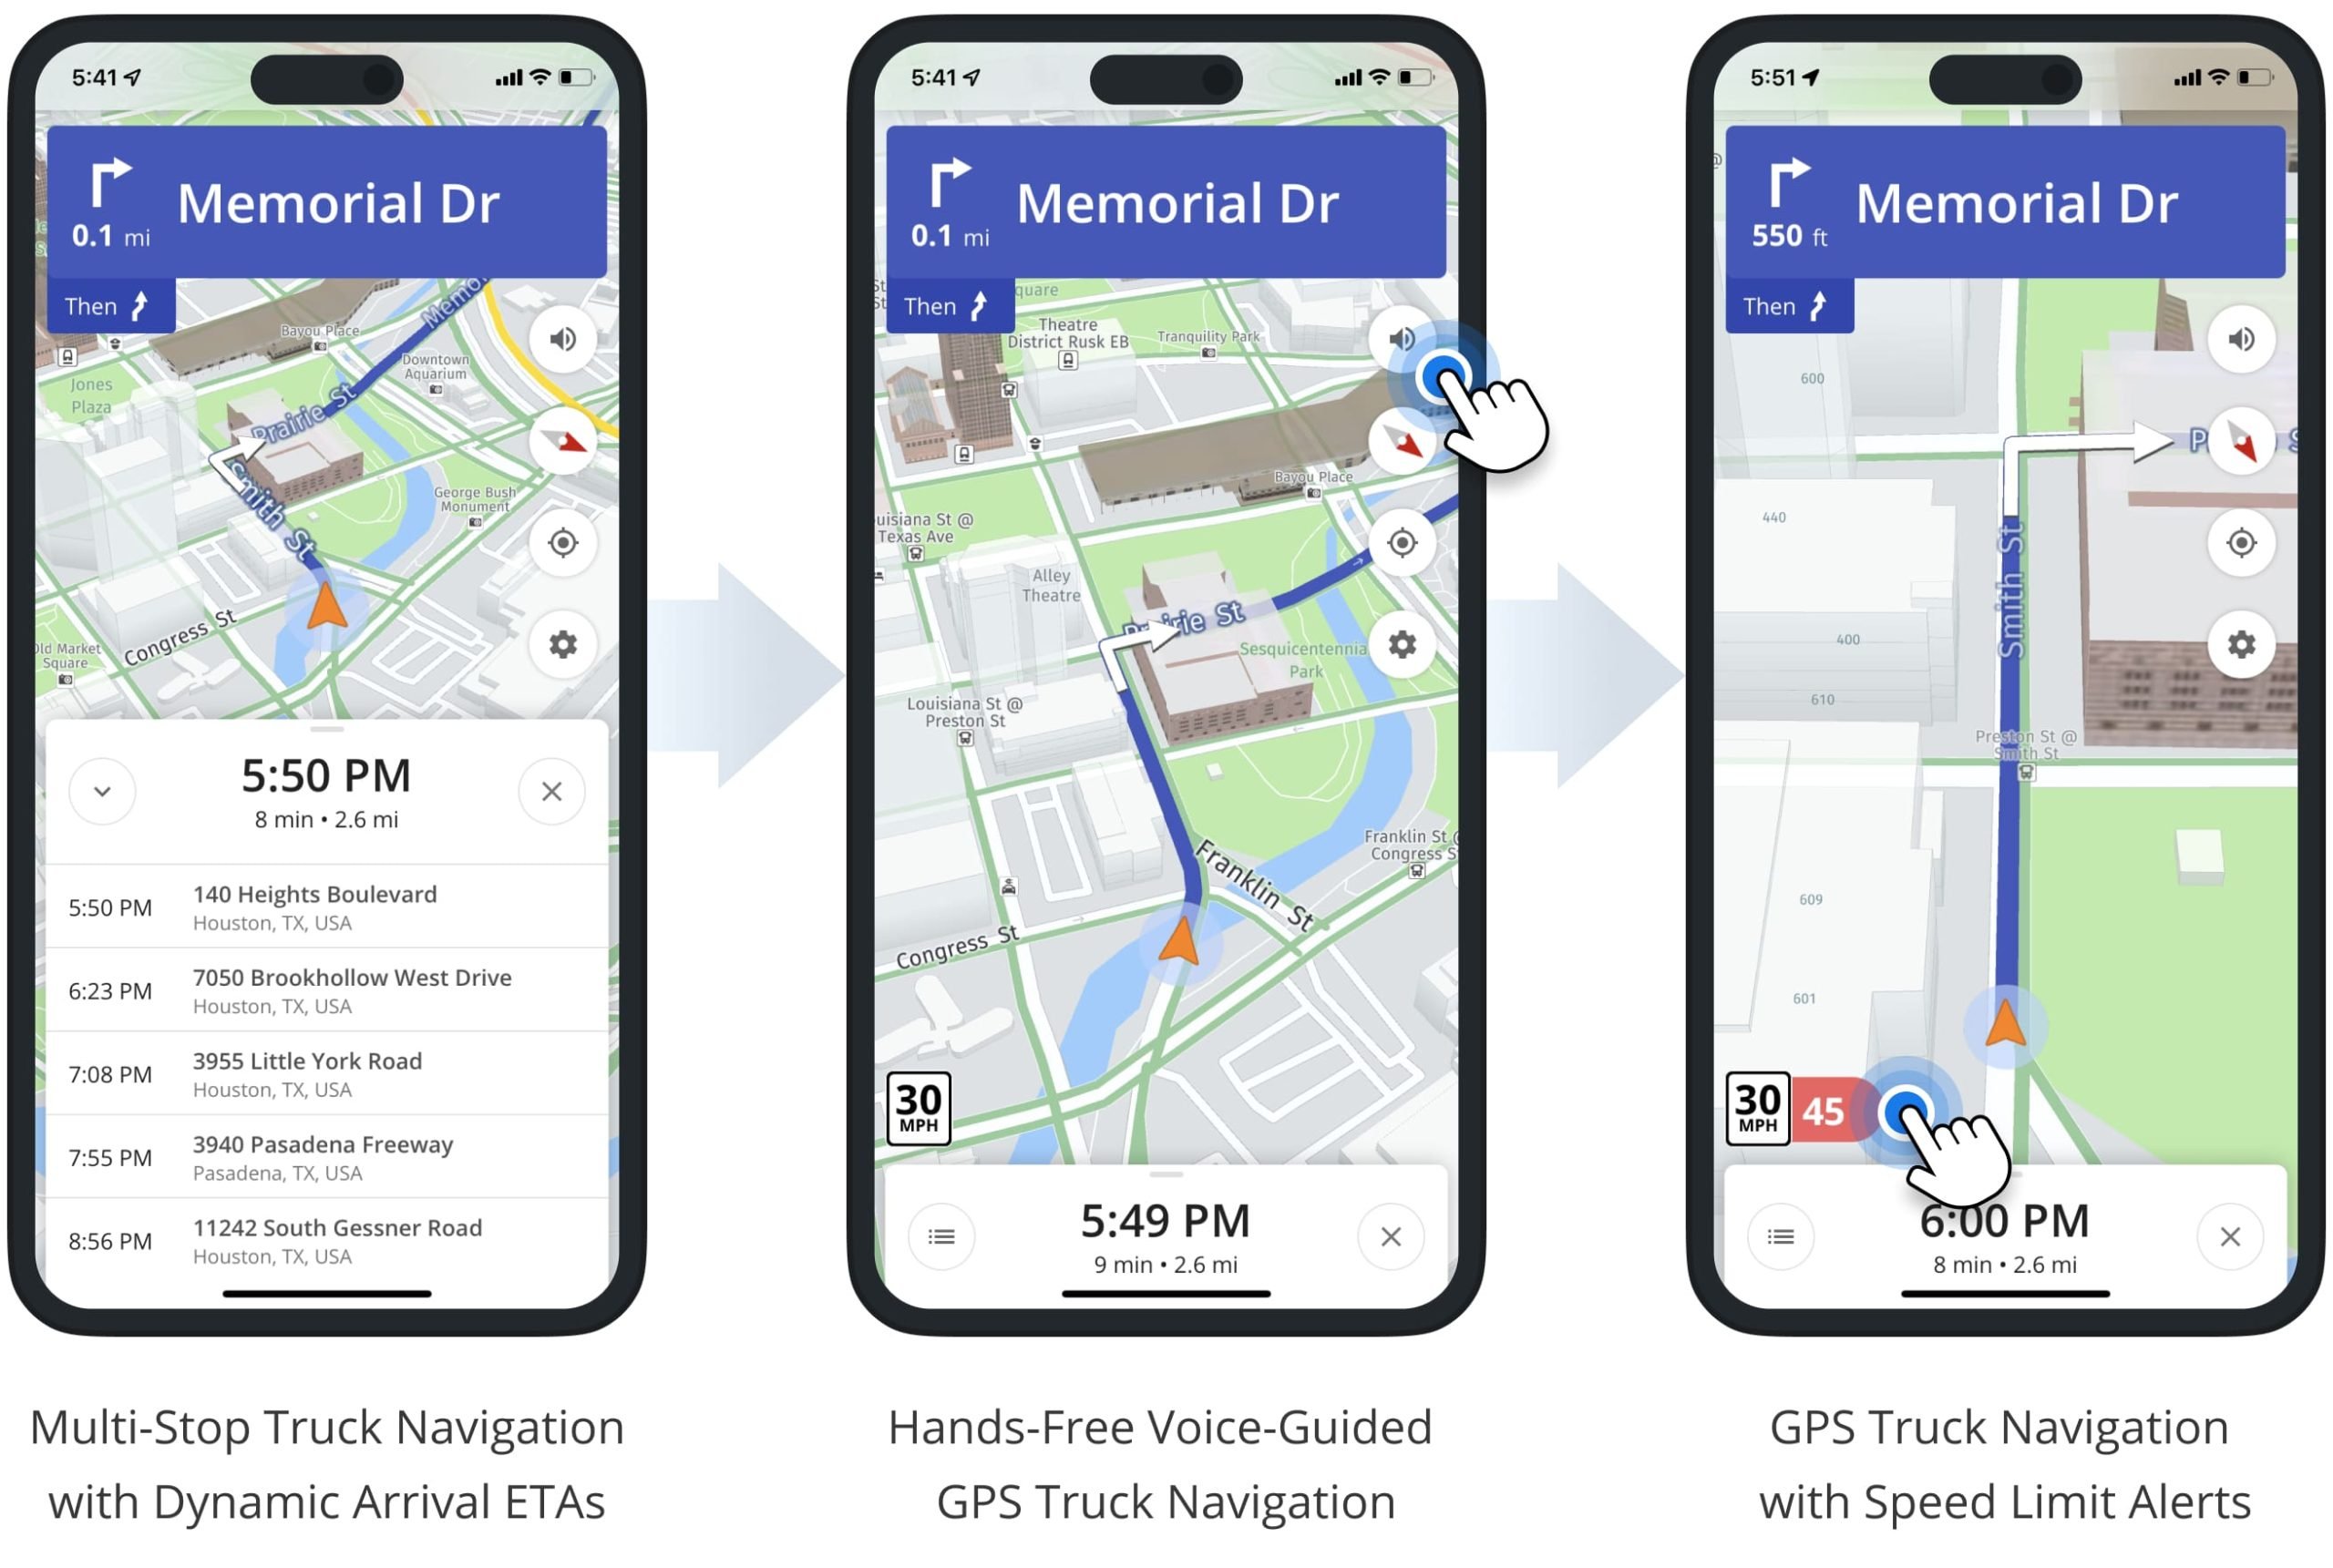 Voice-guided GPS truck navigation with multiple stops, speed alerts, and truck maps for commercial vehicles.